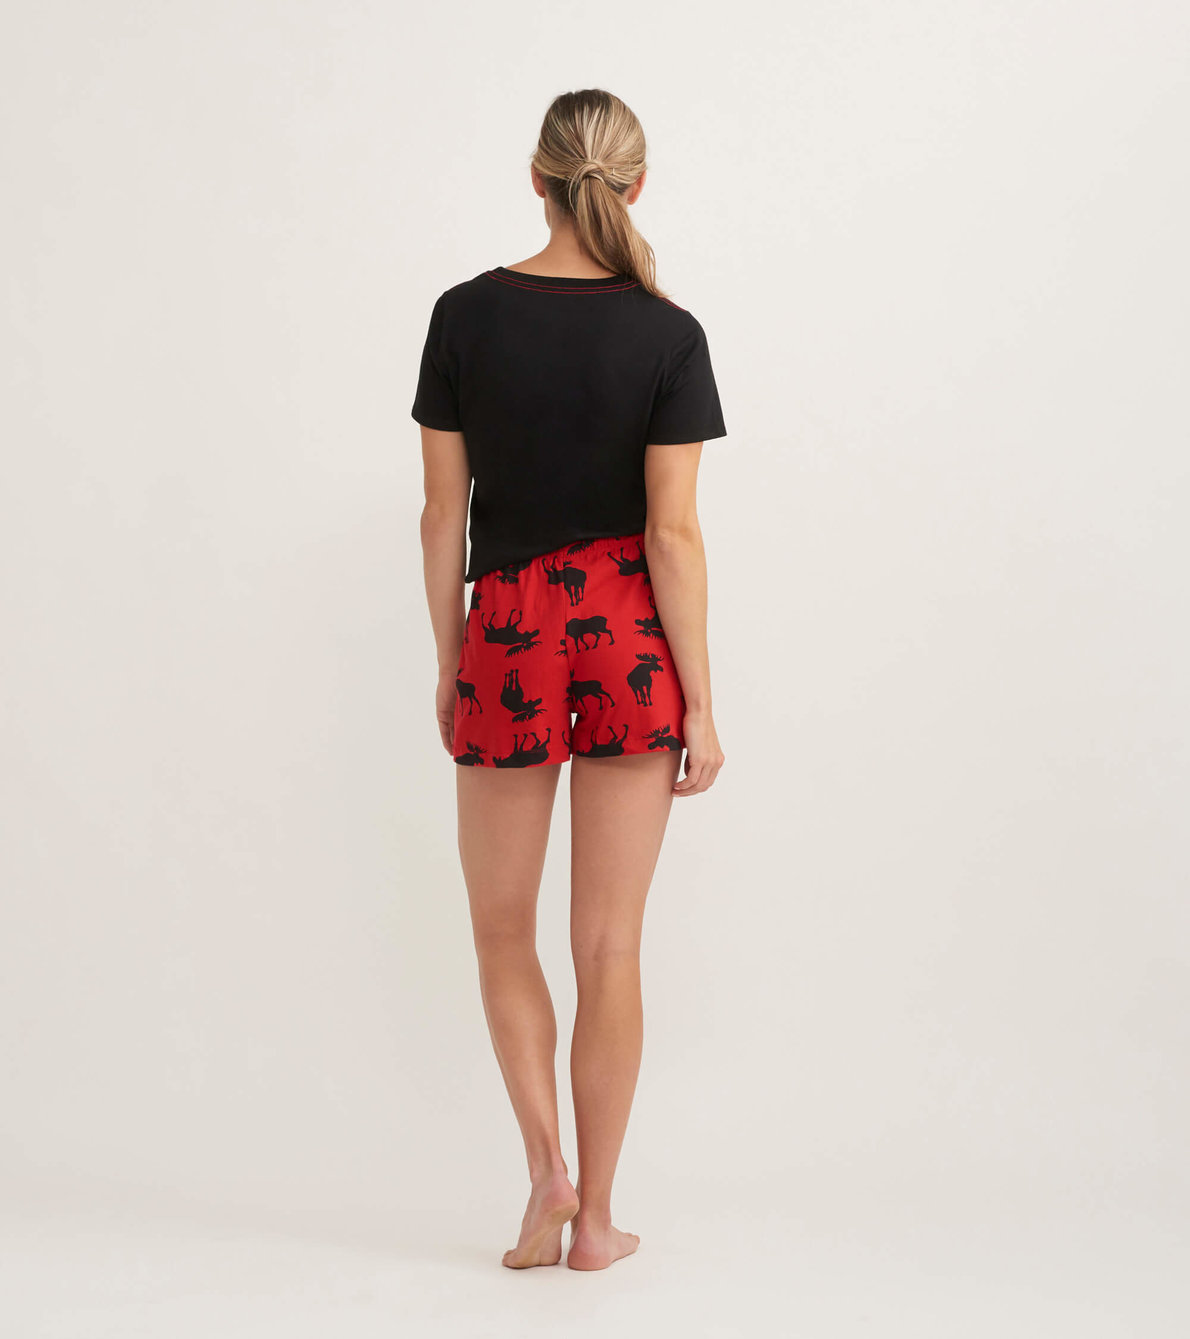 View larger image of Moose on Red Women's Tee and Shorts Pajama Separates